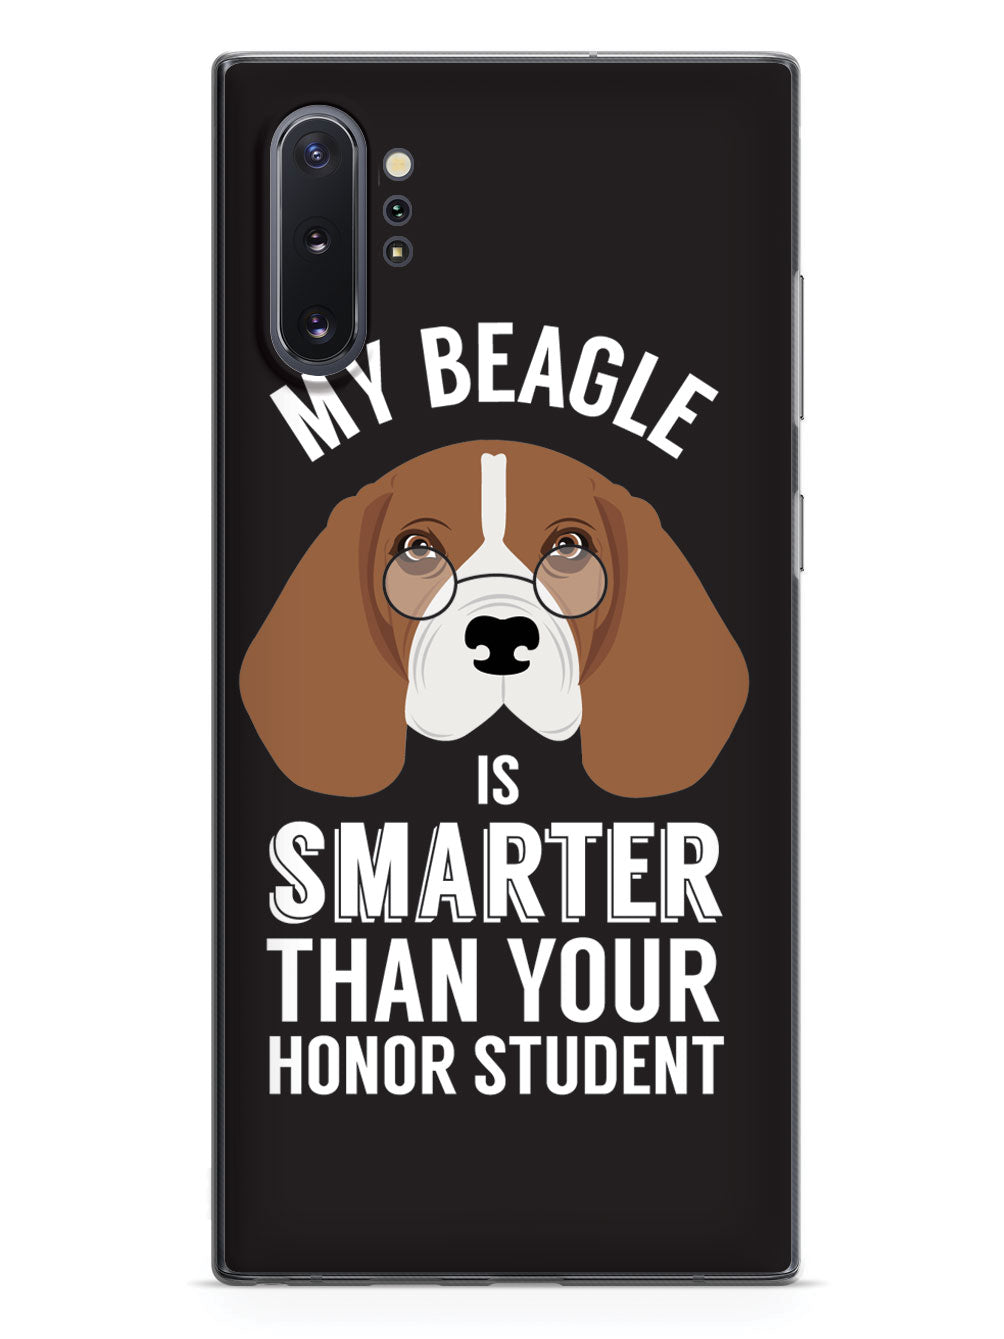 Smarter Than Your Honor Student - Beagle Case